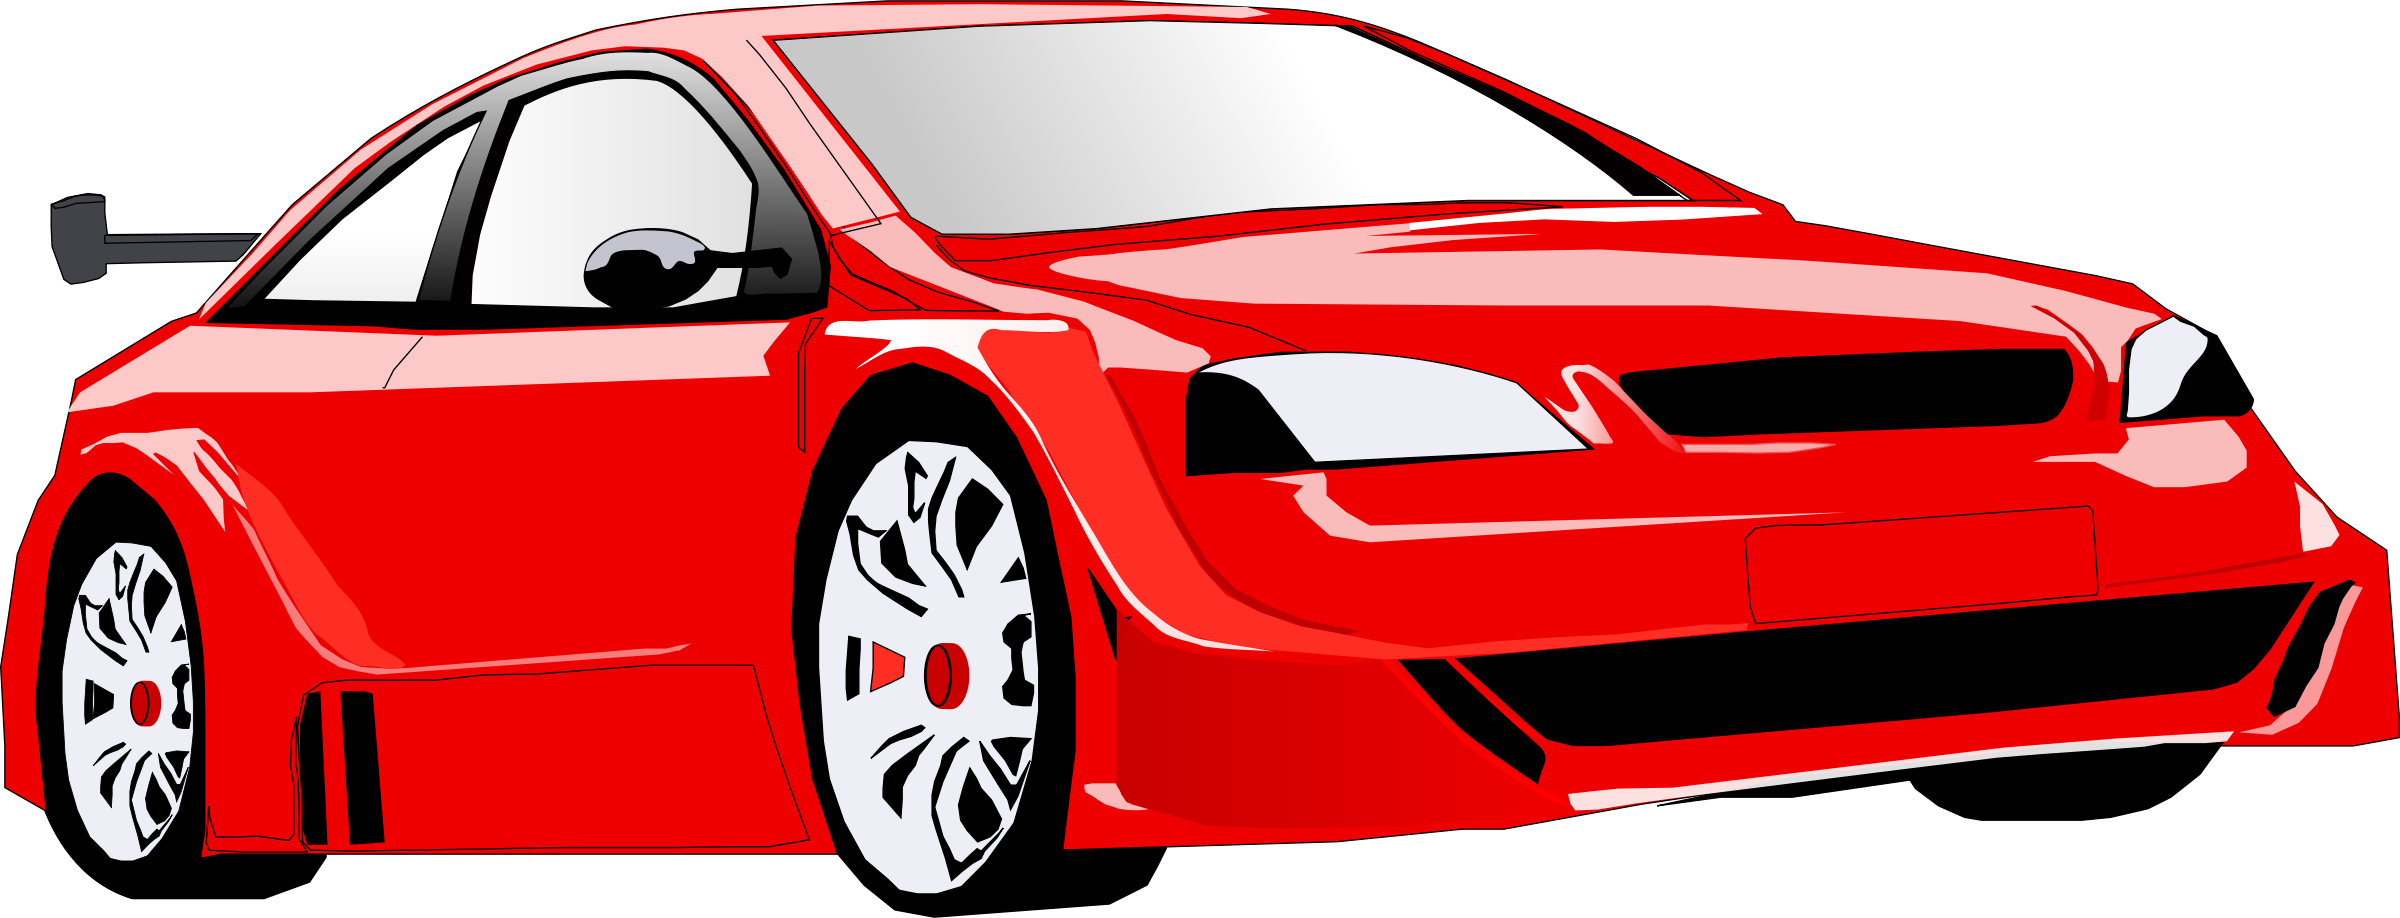 Free Images Of A Car, Download Free Clip Art, Free Clip Art.